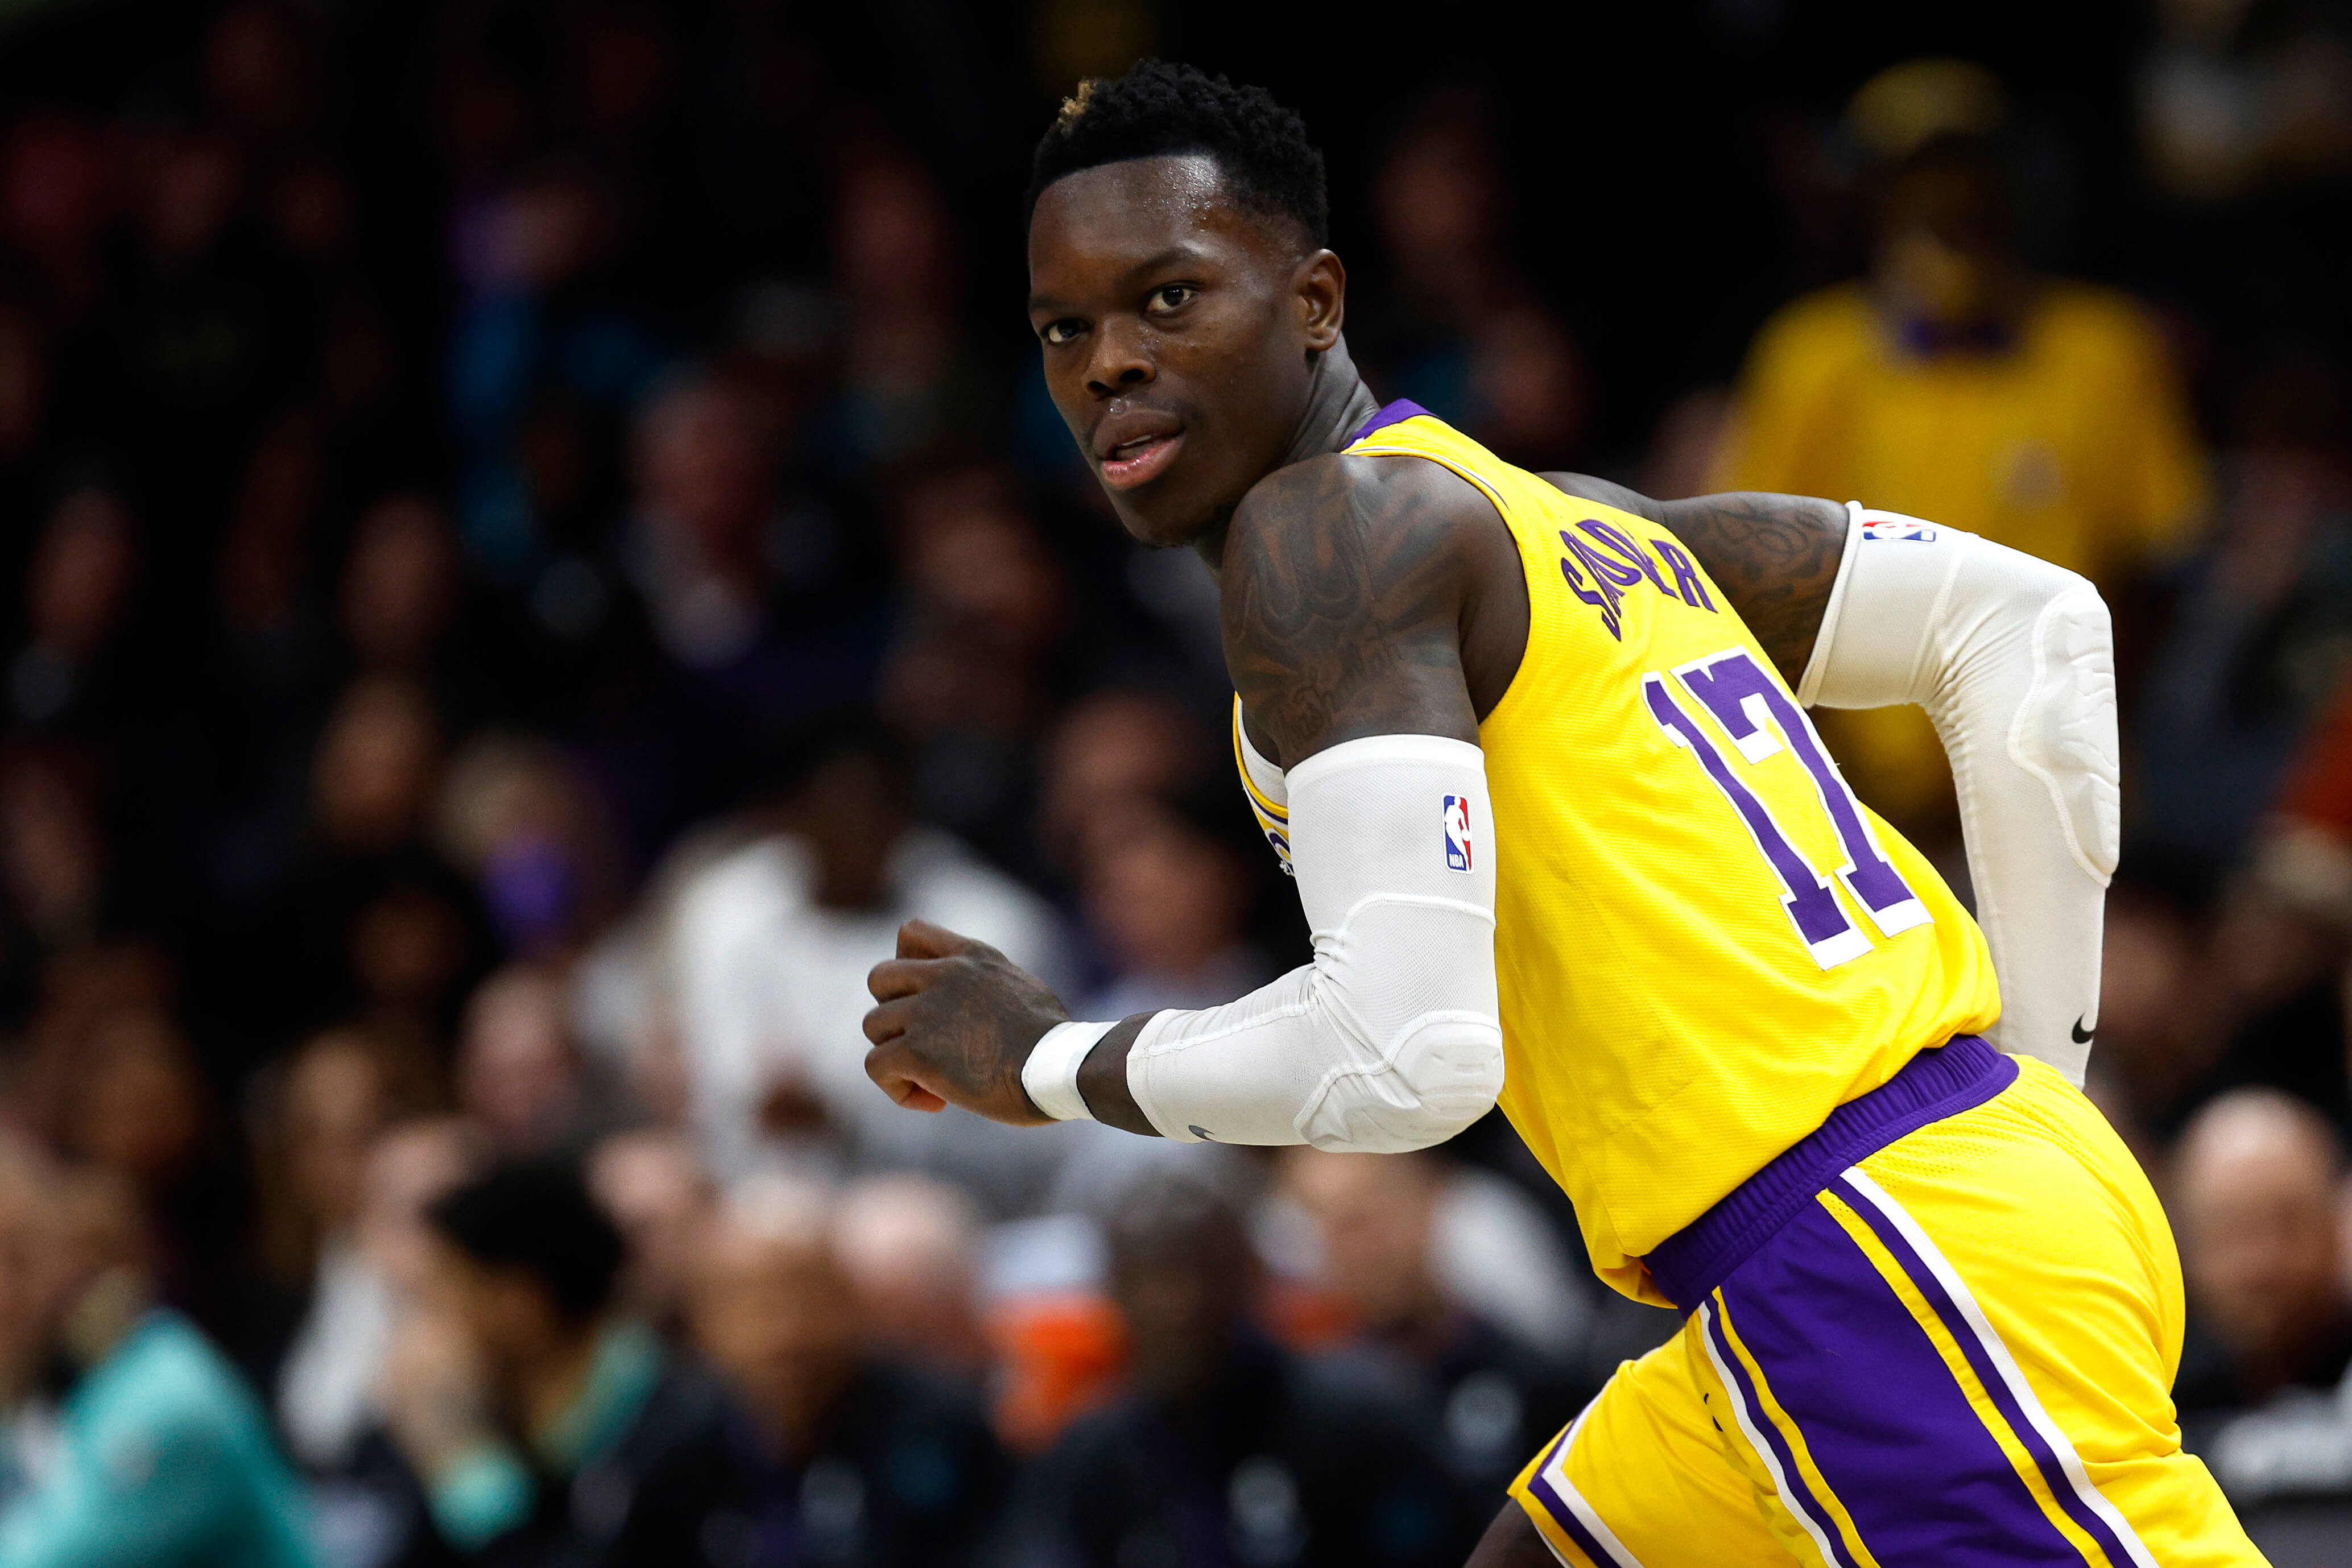 Dennis Schroder detained by LAPD, complains of being very aggressively  handcuffed - Eurohoops